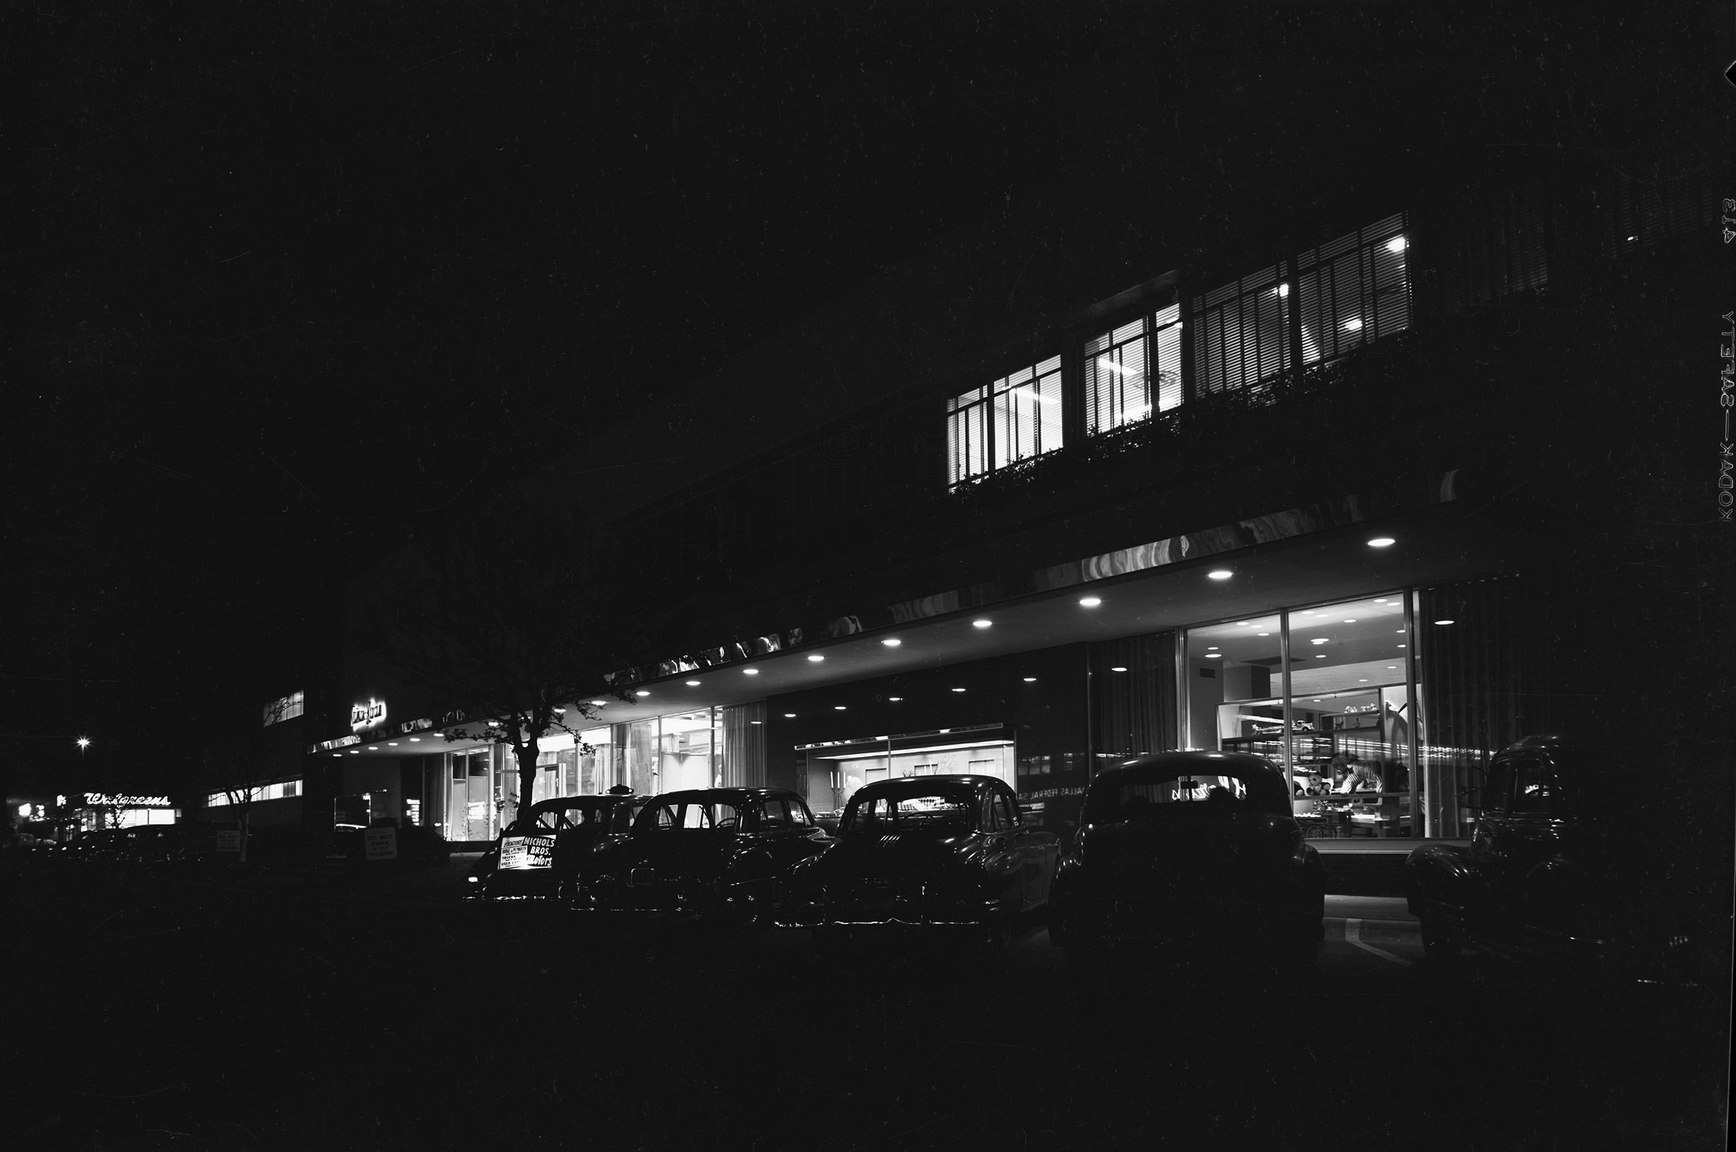 Neiman Marcus' store at night, downtown Dallas, Texas, 1952